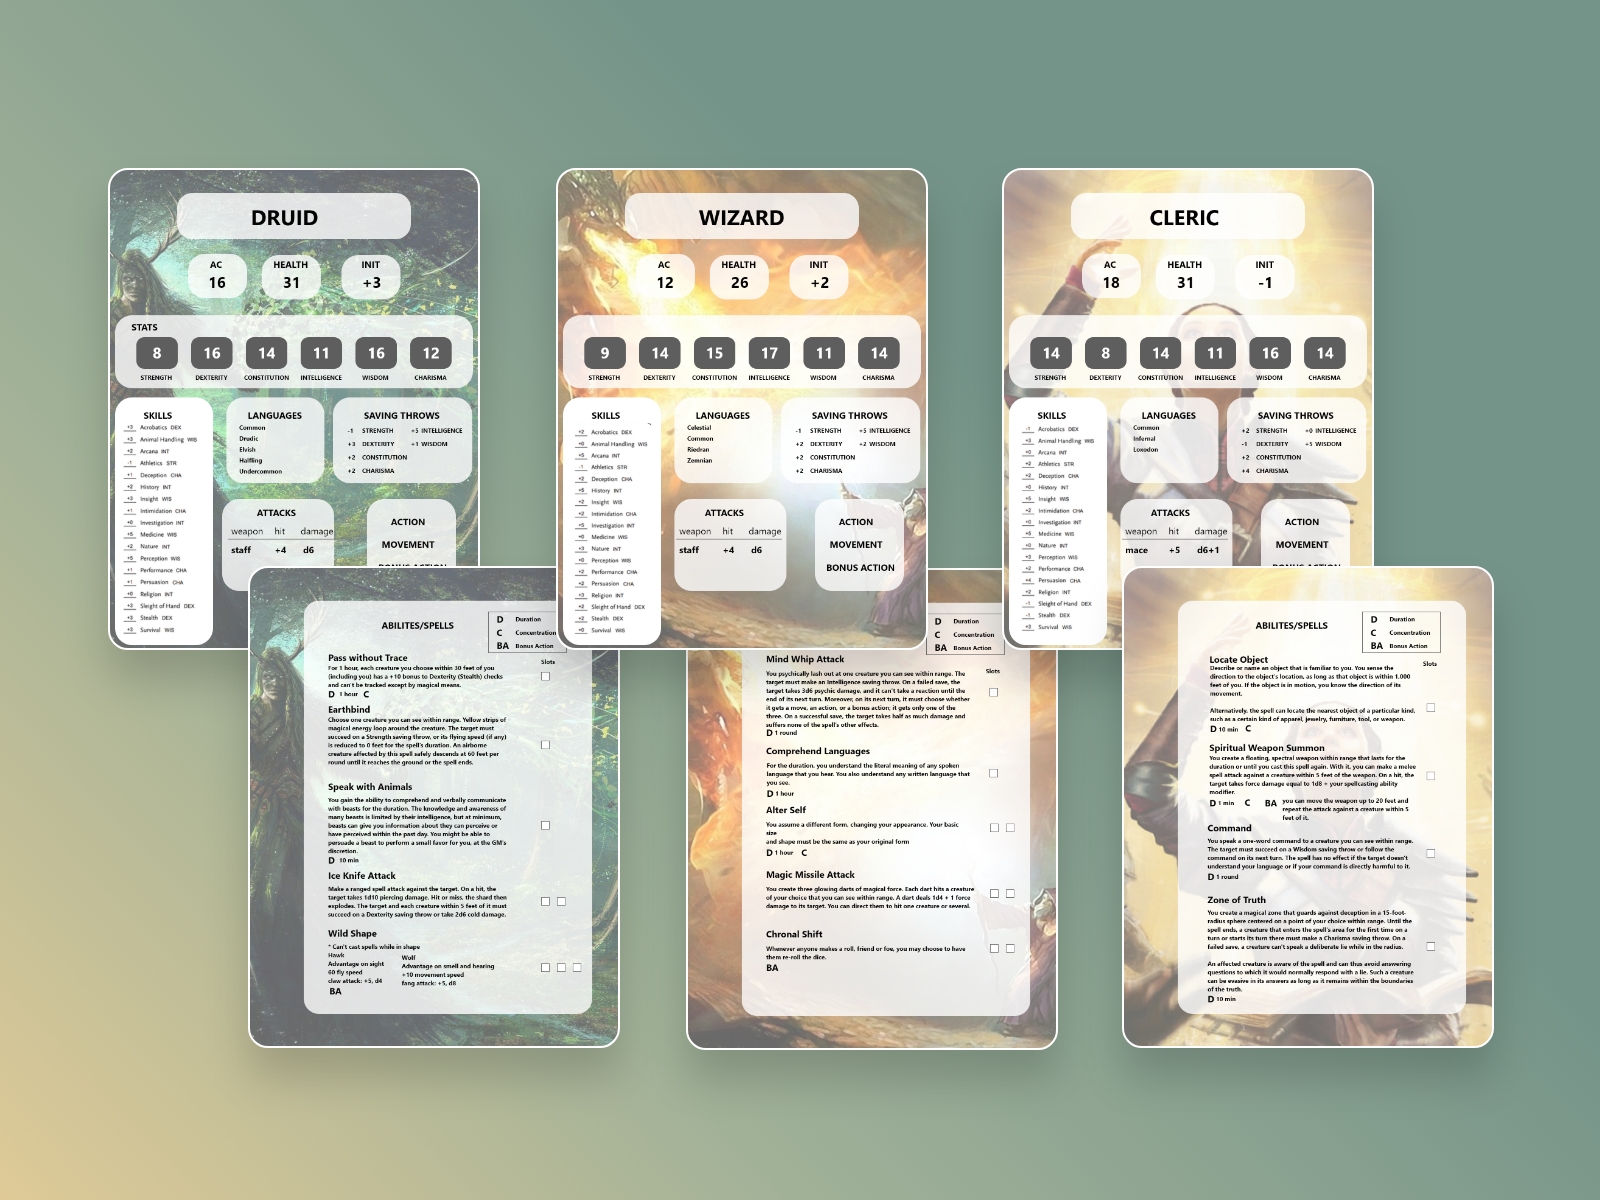 DnD Oneshot Cards by Jennifer Downs on Dribbble